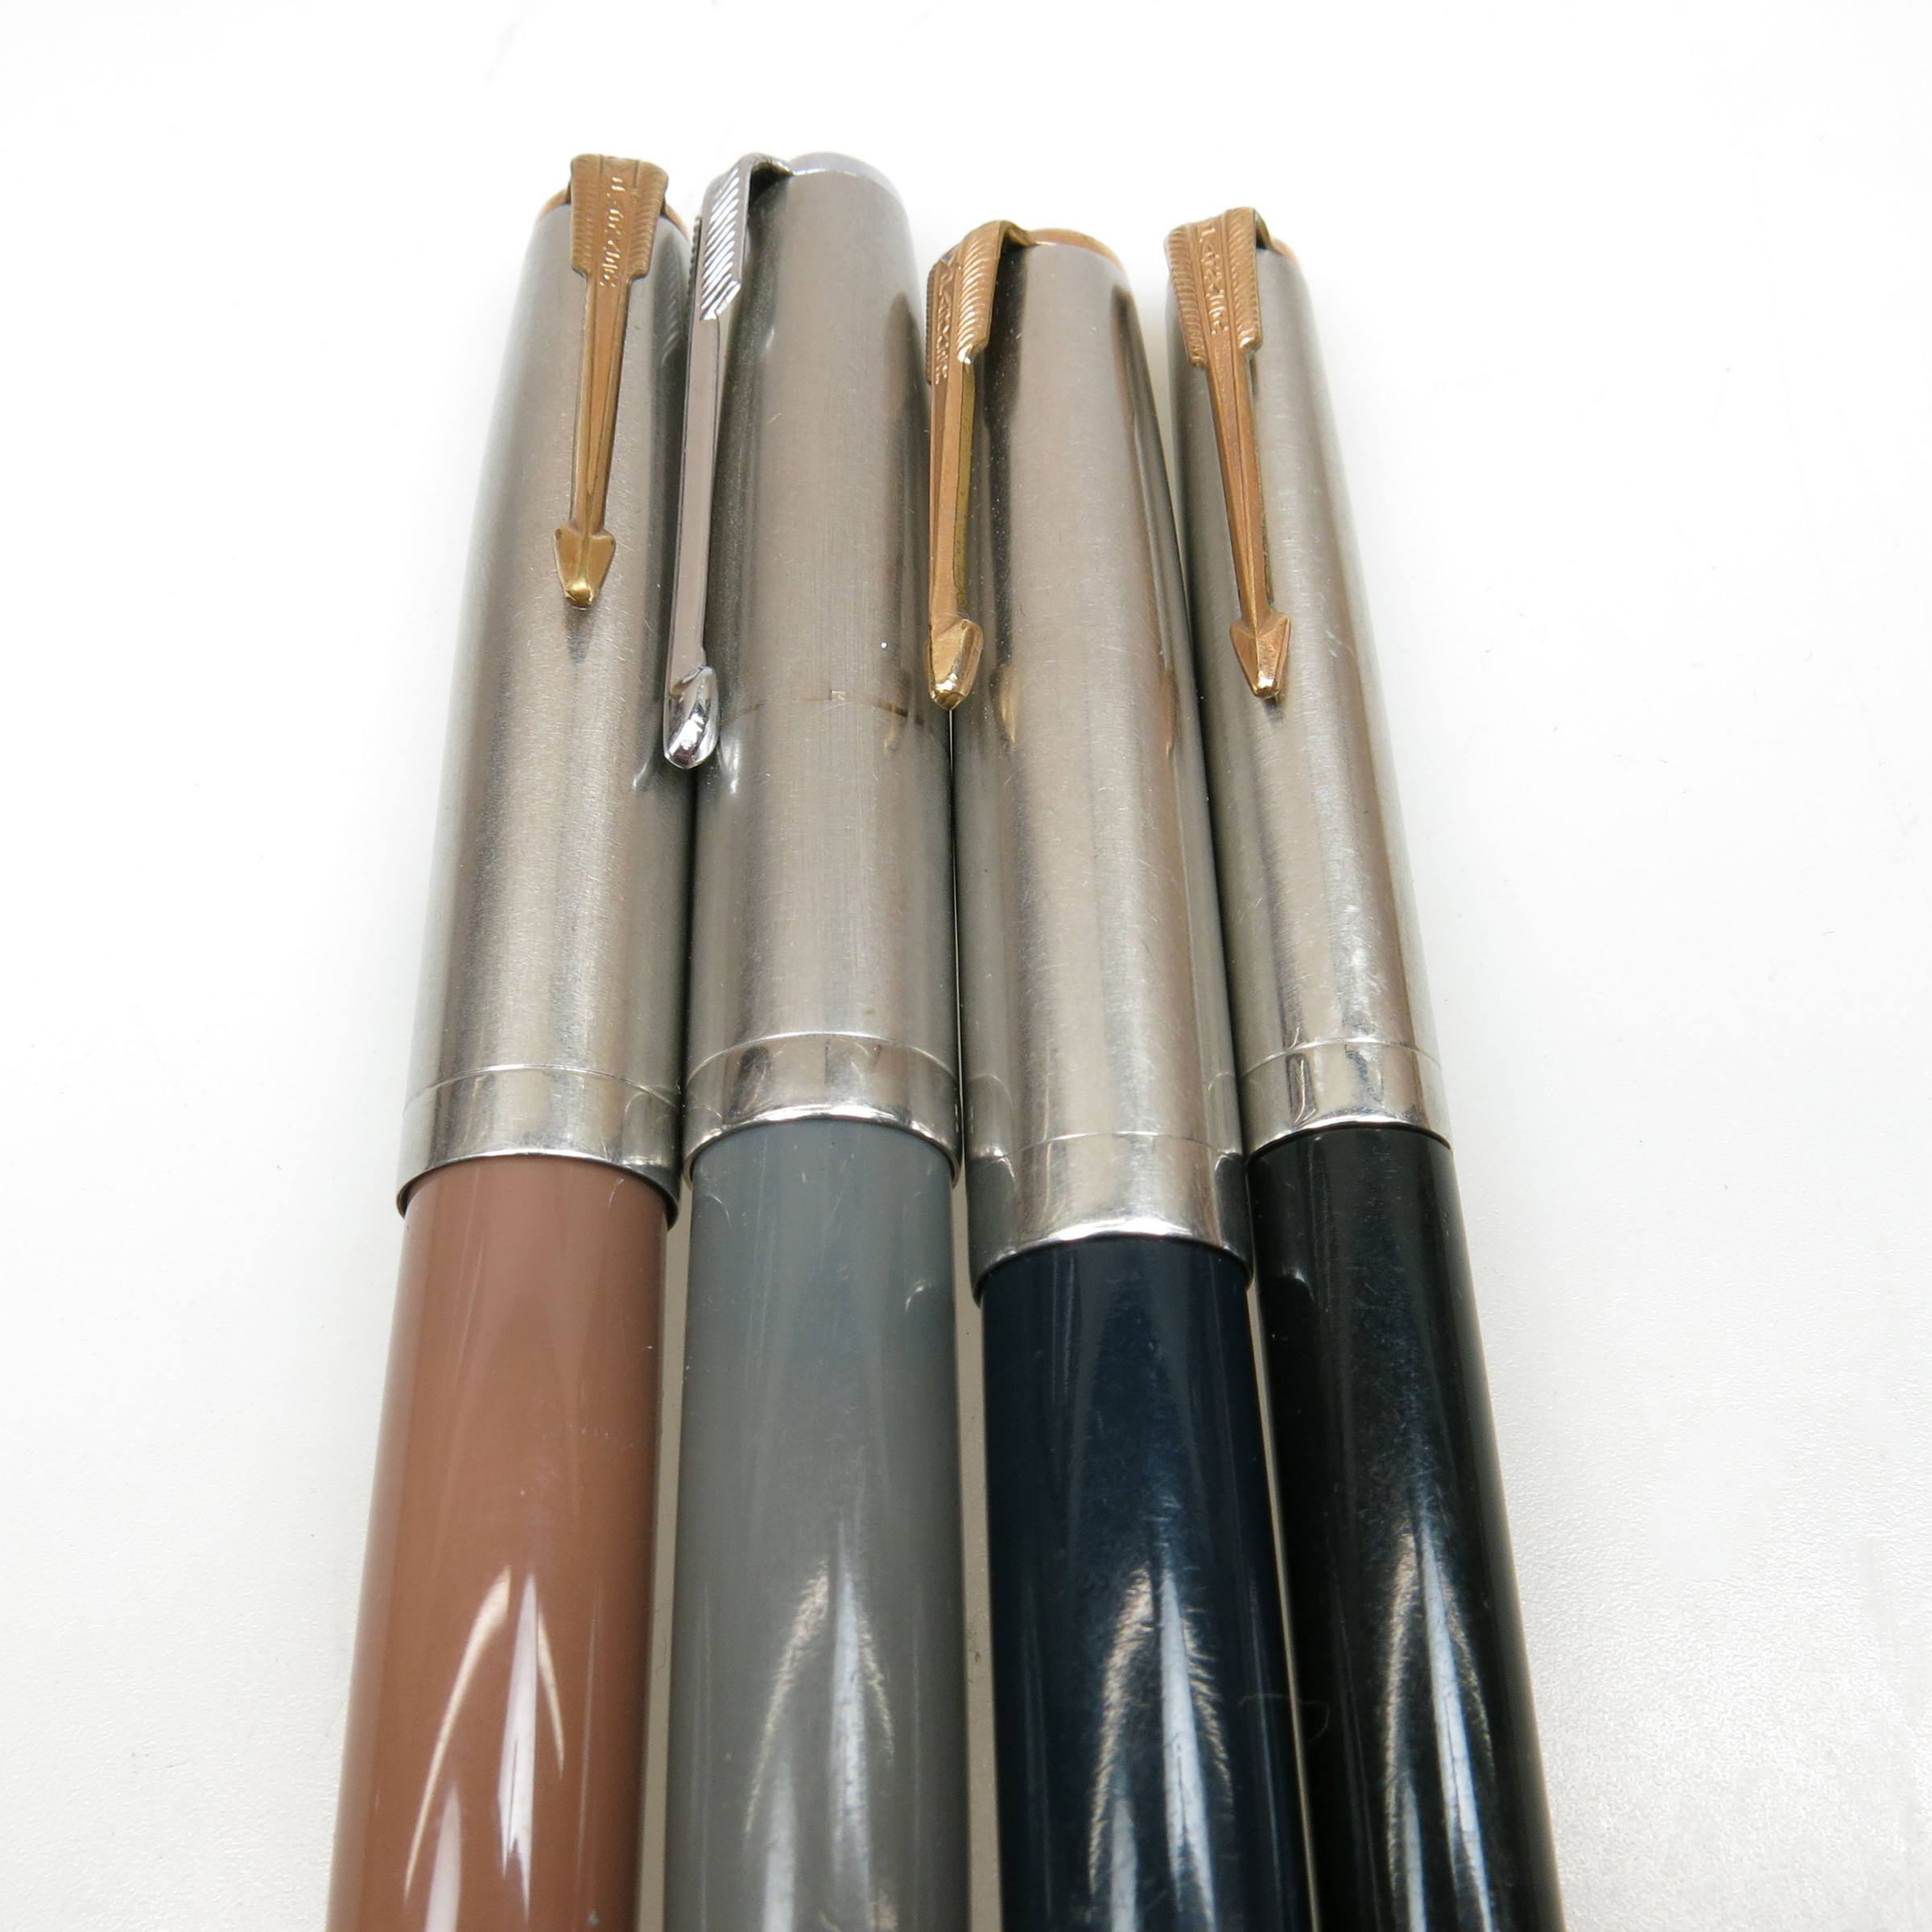 3 Parker 51 Fountain Pens And a Similar Mechanical Pencil